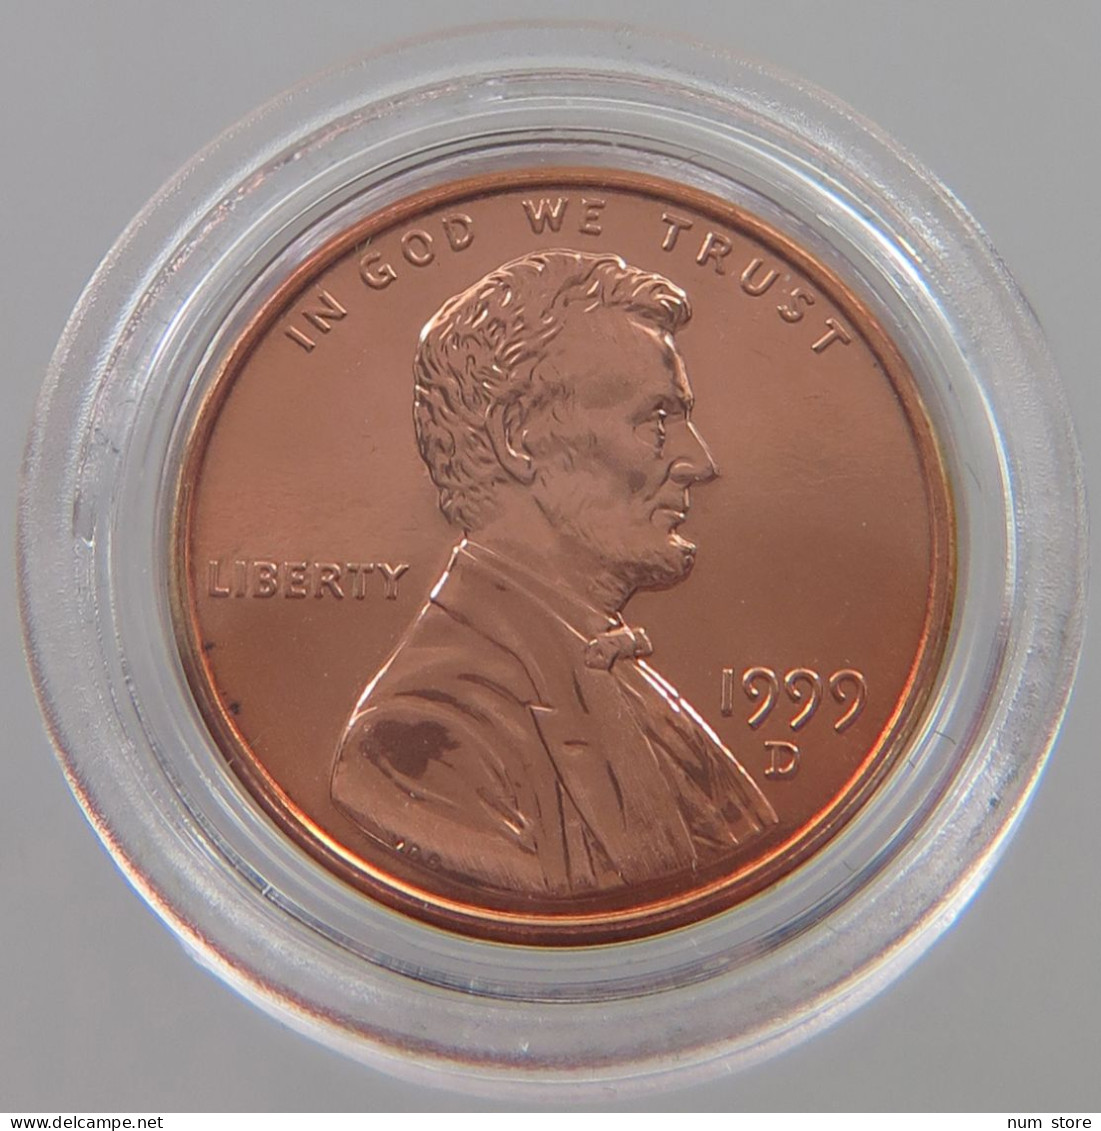 UNITED STATES OF AMERICA CENT 1999 D LINCOLN MEMORIAL #alb024 0075 - 1959-…: Lincoln, Memorial Reverse